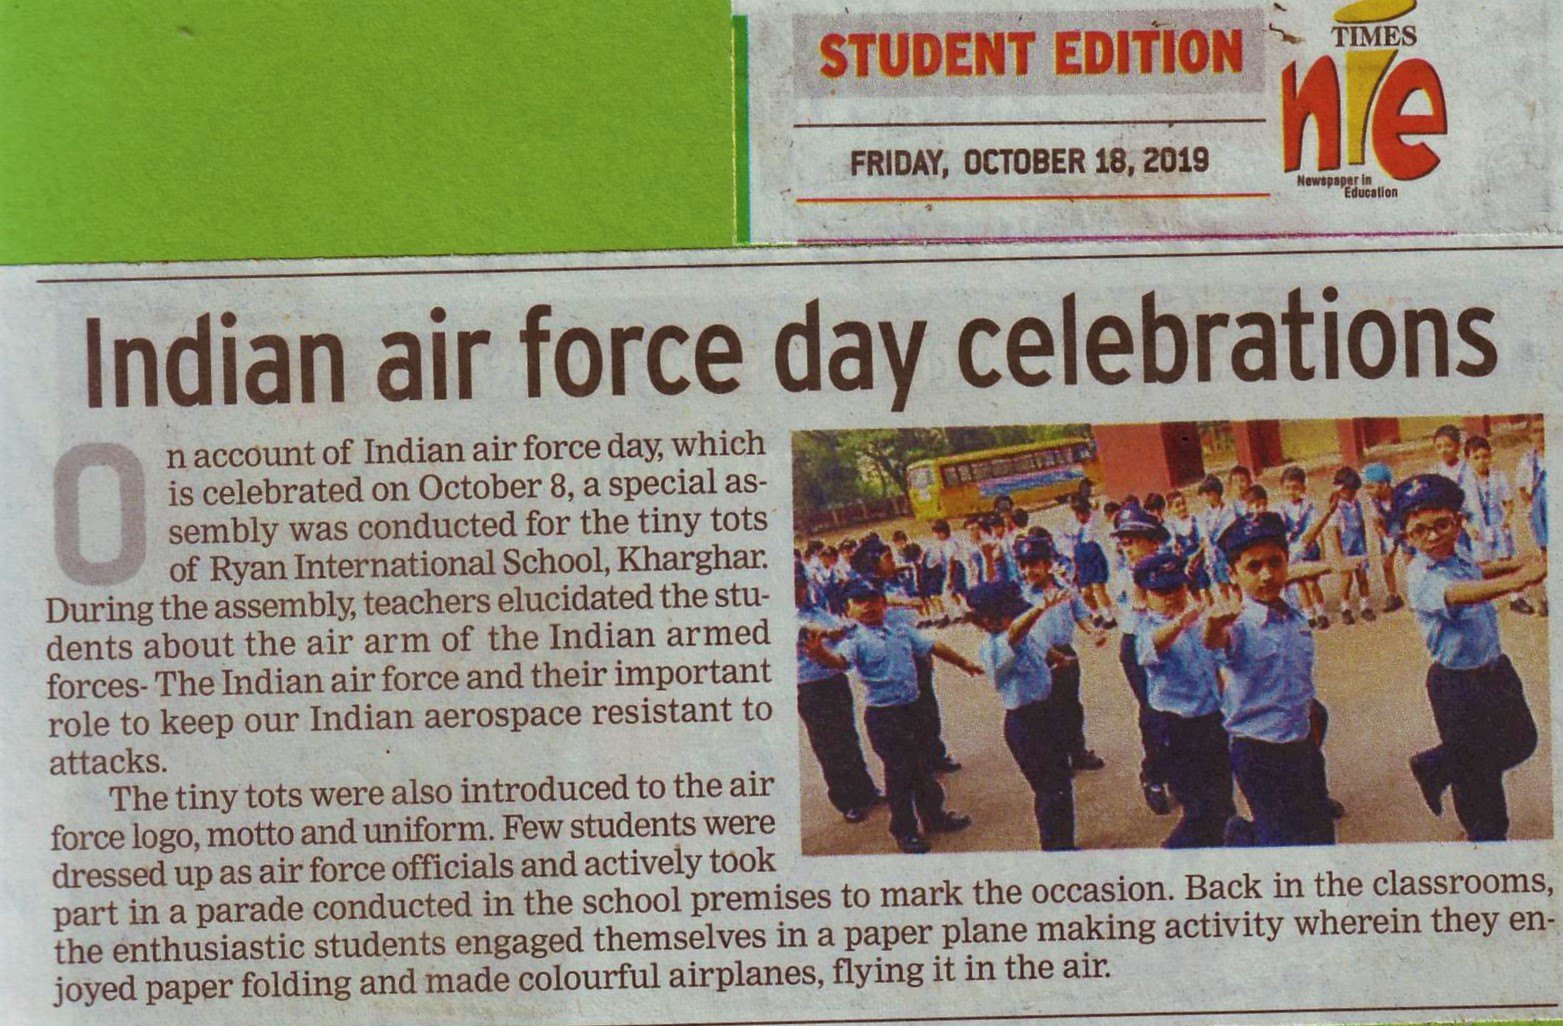 Indian air force day celebrations was mentioned in Times NIE - Ryan International School, Kharghar